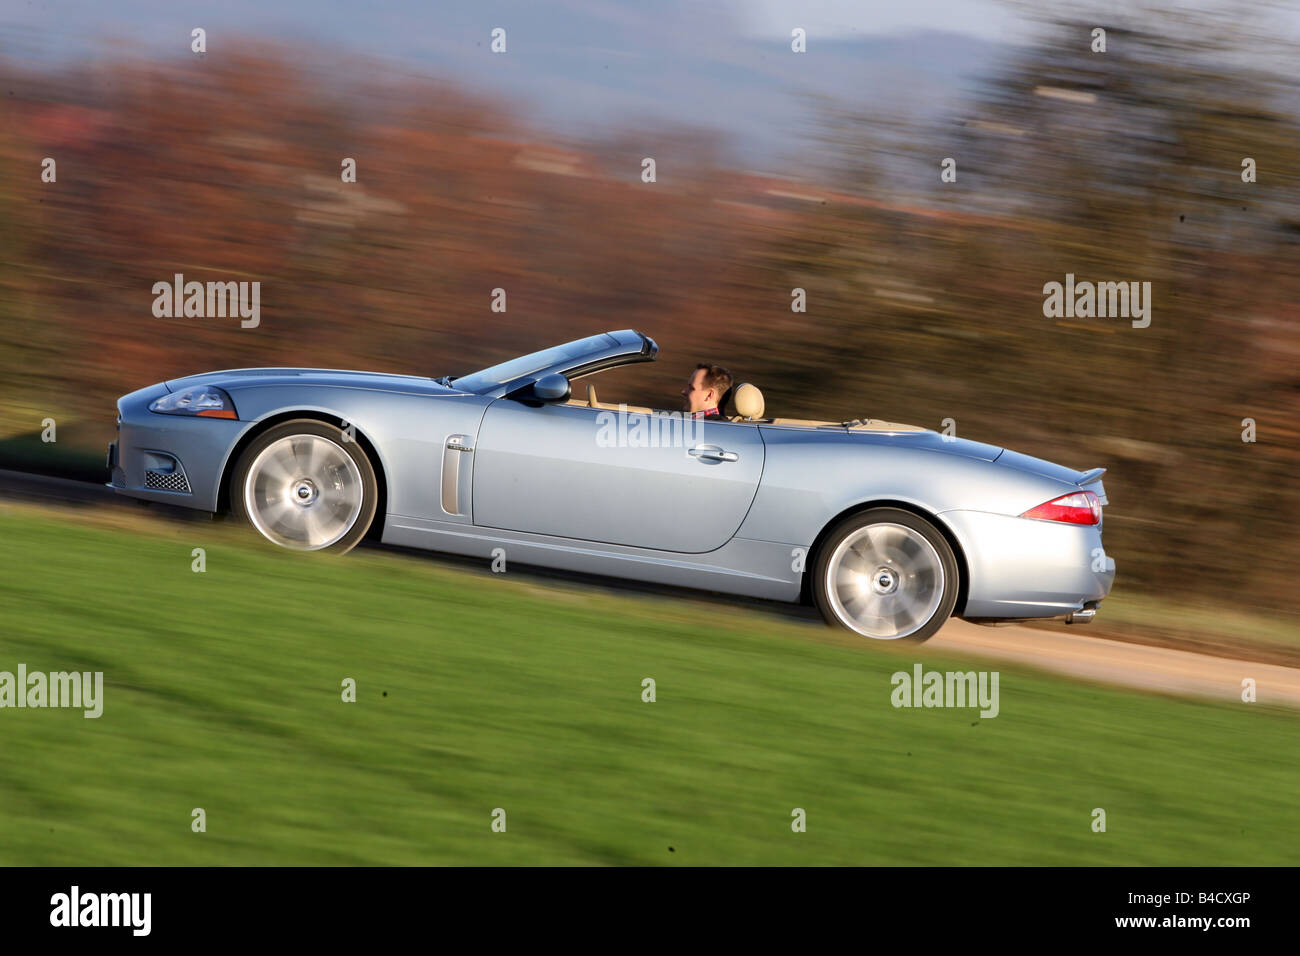 Jaguar XKR Convertible, model year 2006-, silver, driving, side view, country road, open top Stock Photo